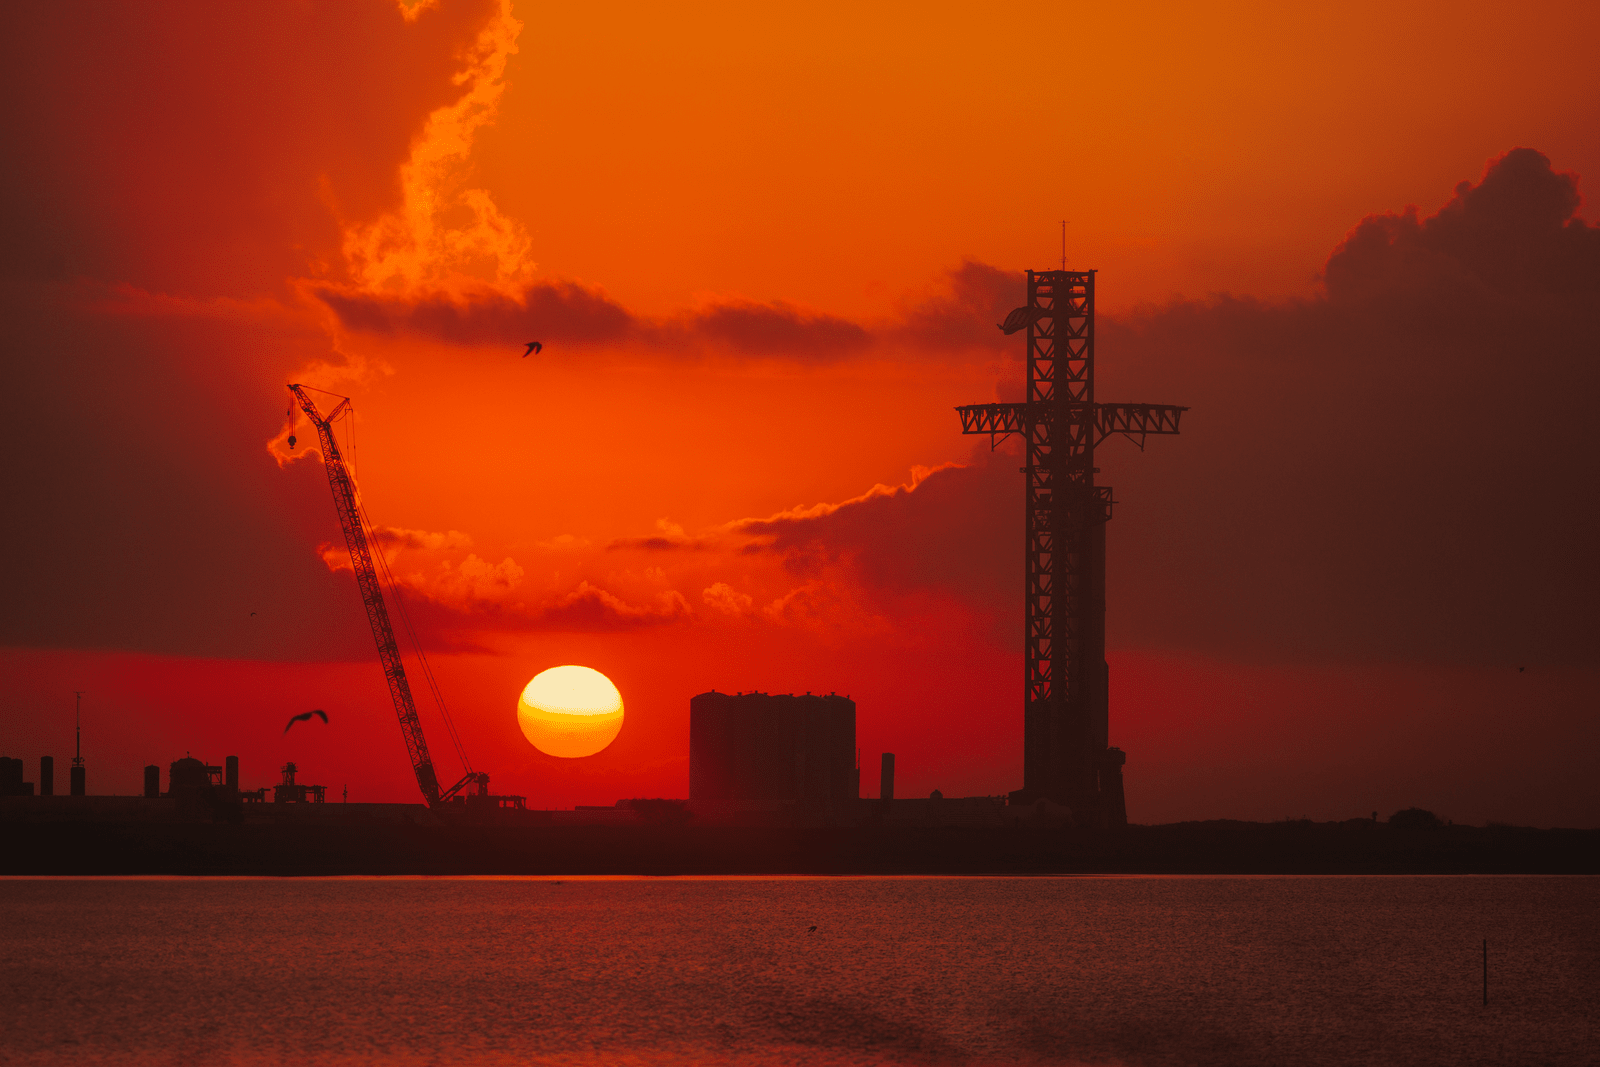 Sunrise over the Launch Pad